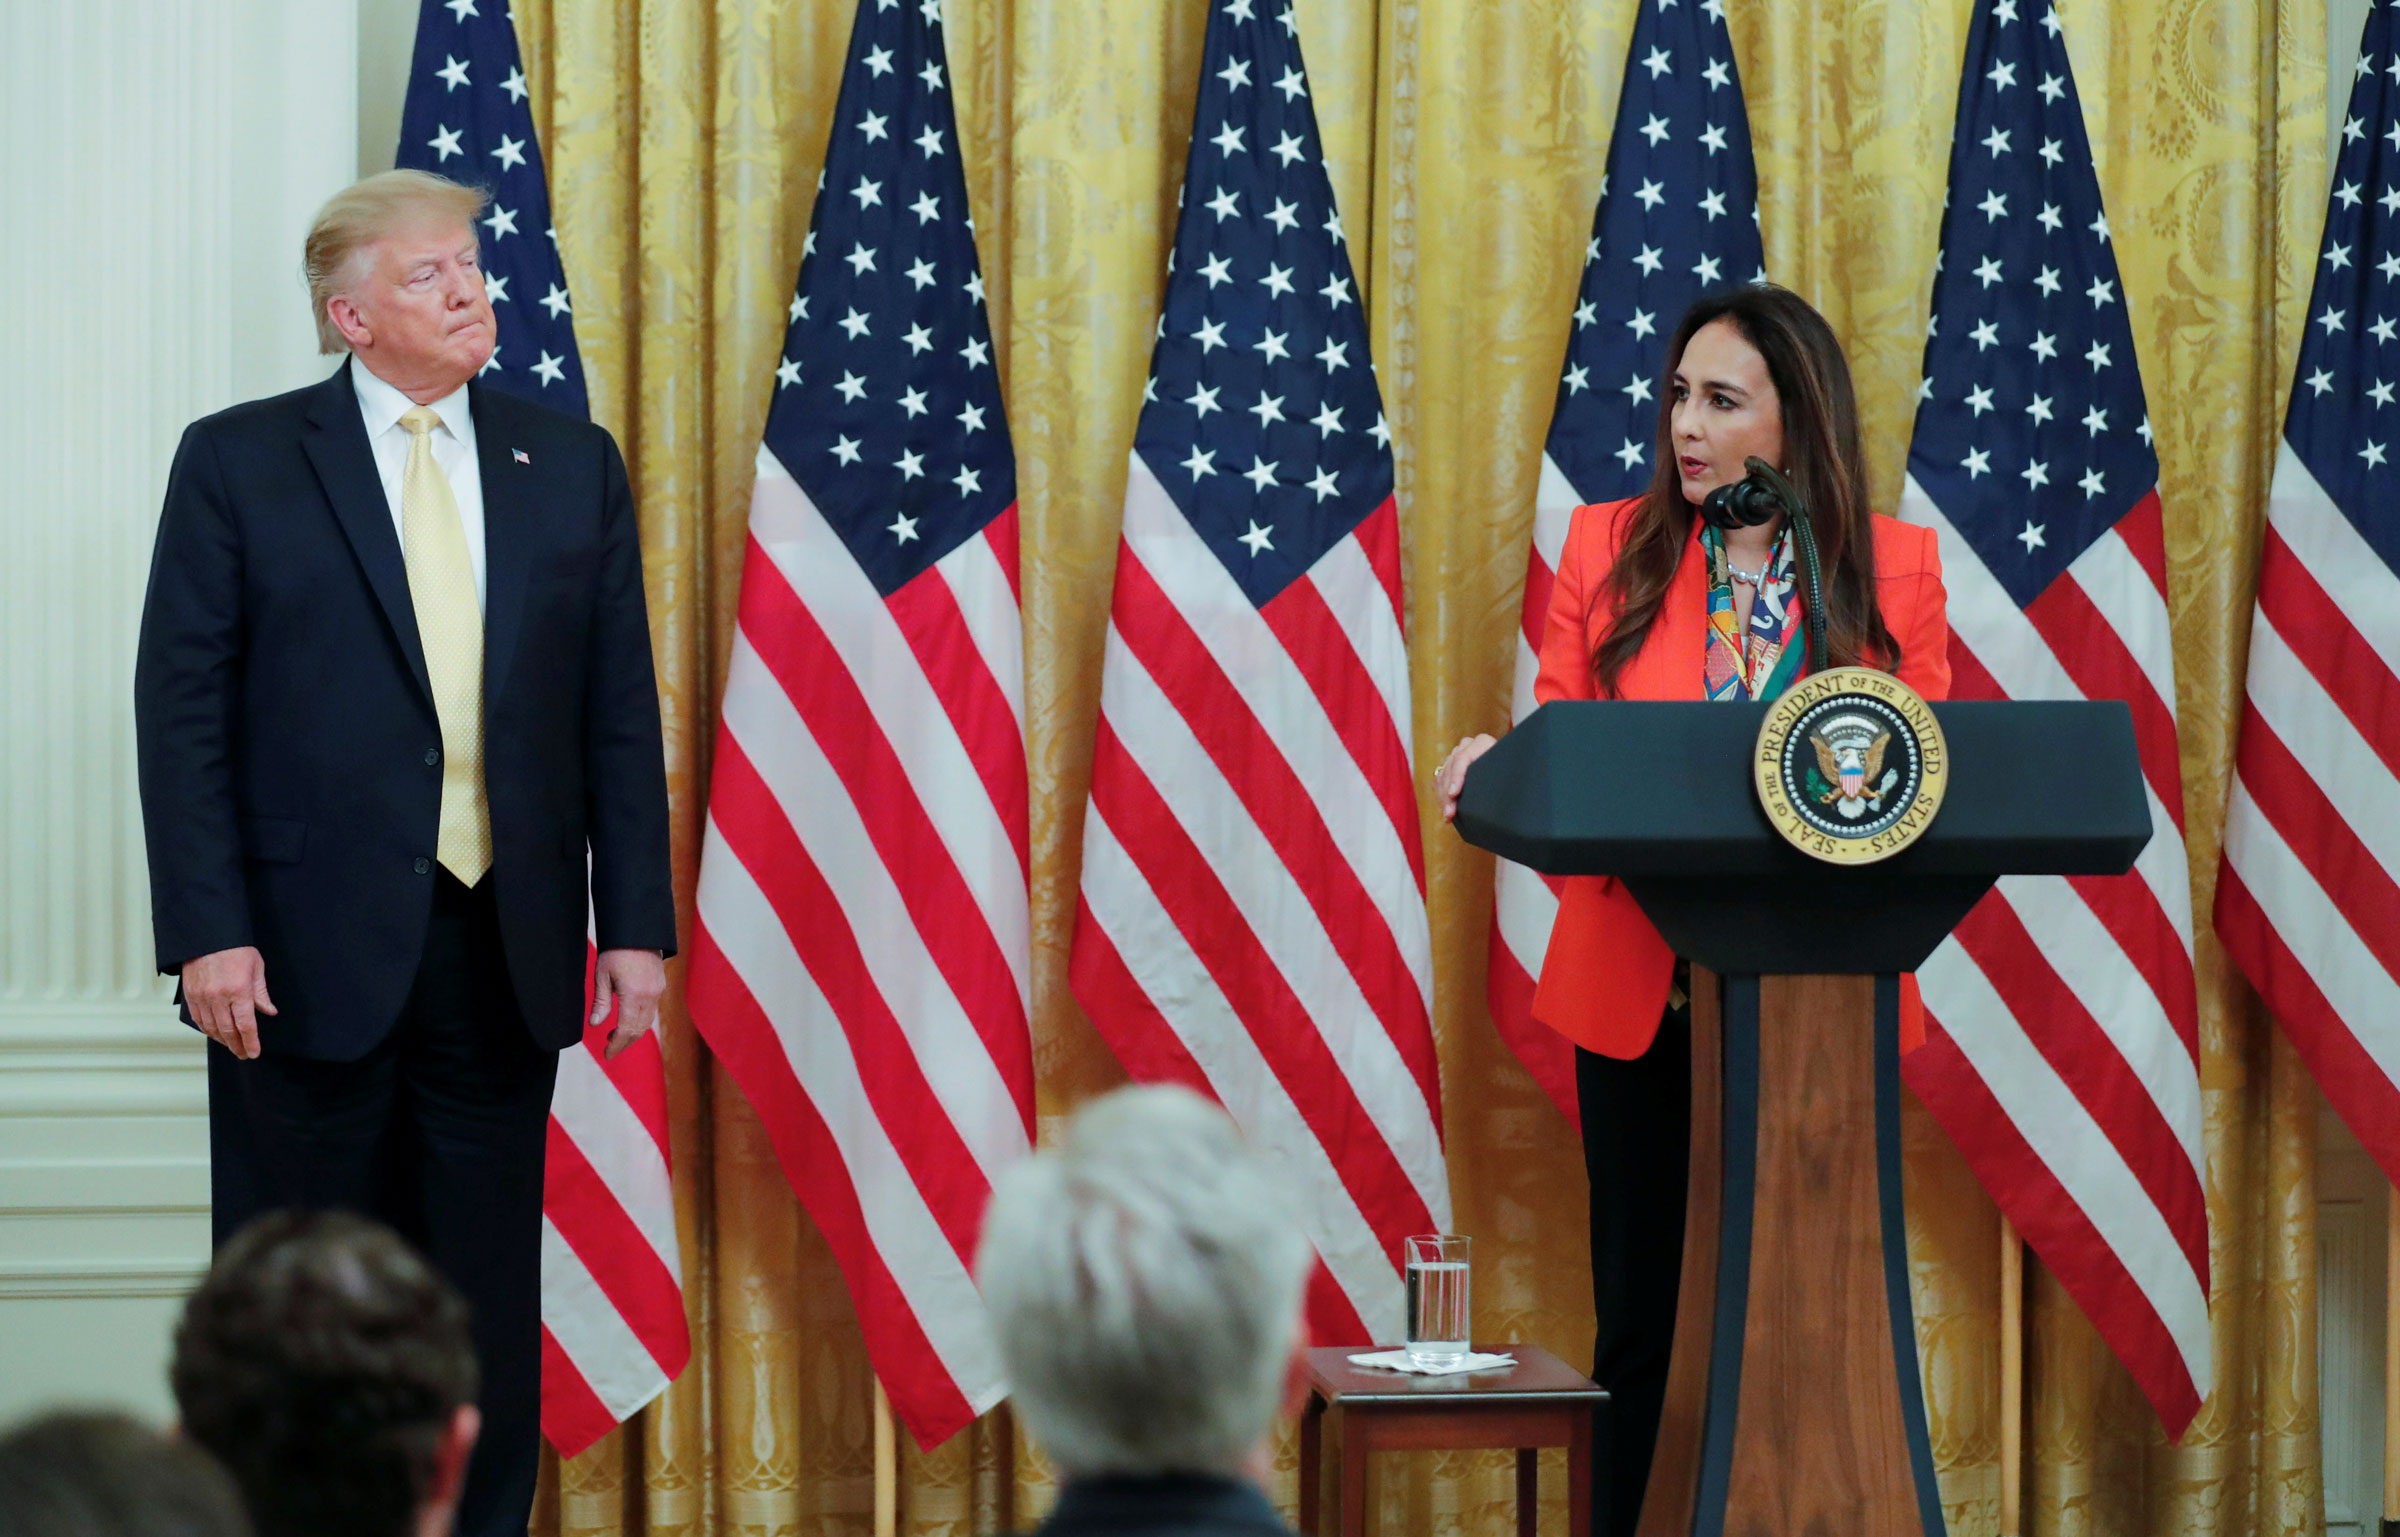 President Donald Trump listens as attorney Harmeet Dhillon addresses his social media summit with prominent conservative social media figures in the East Room of the White House in Washington, D.C., on July 11, 2019. (Carlos Barria—Reuters)